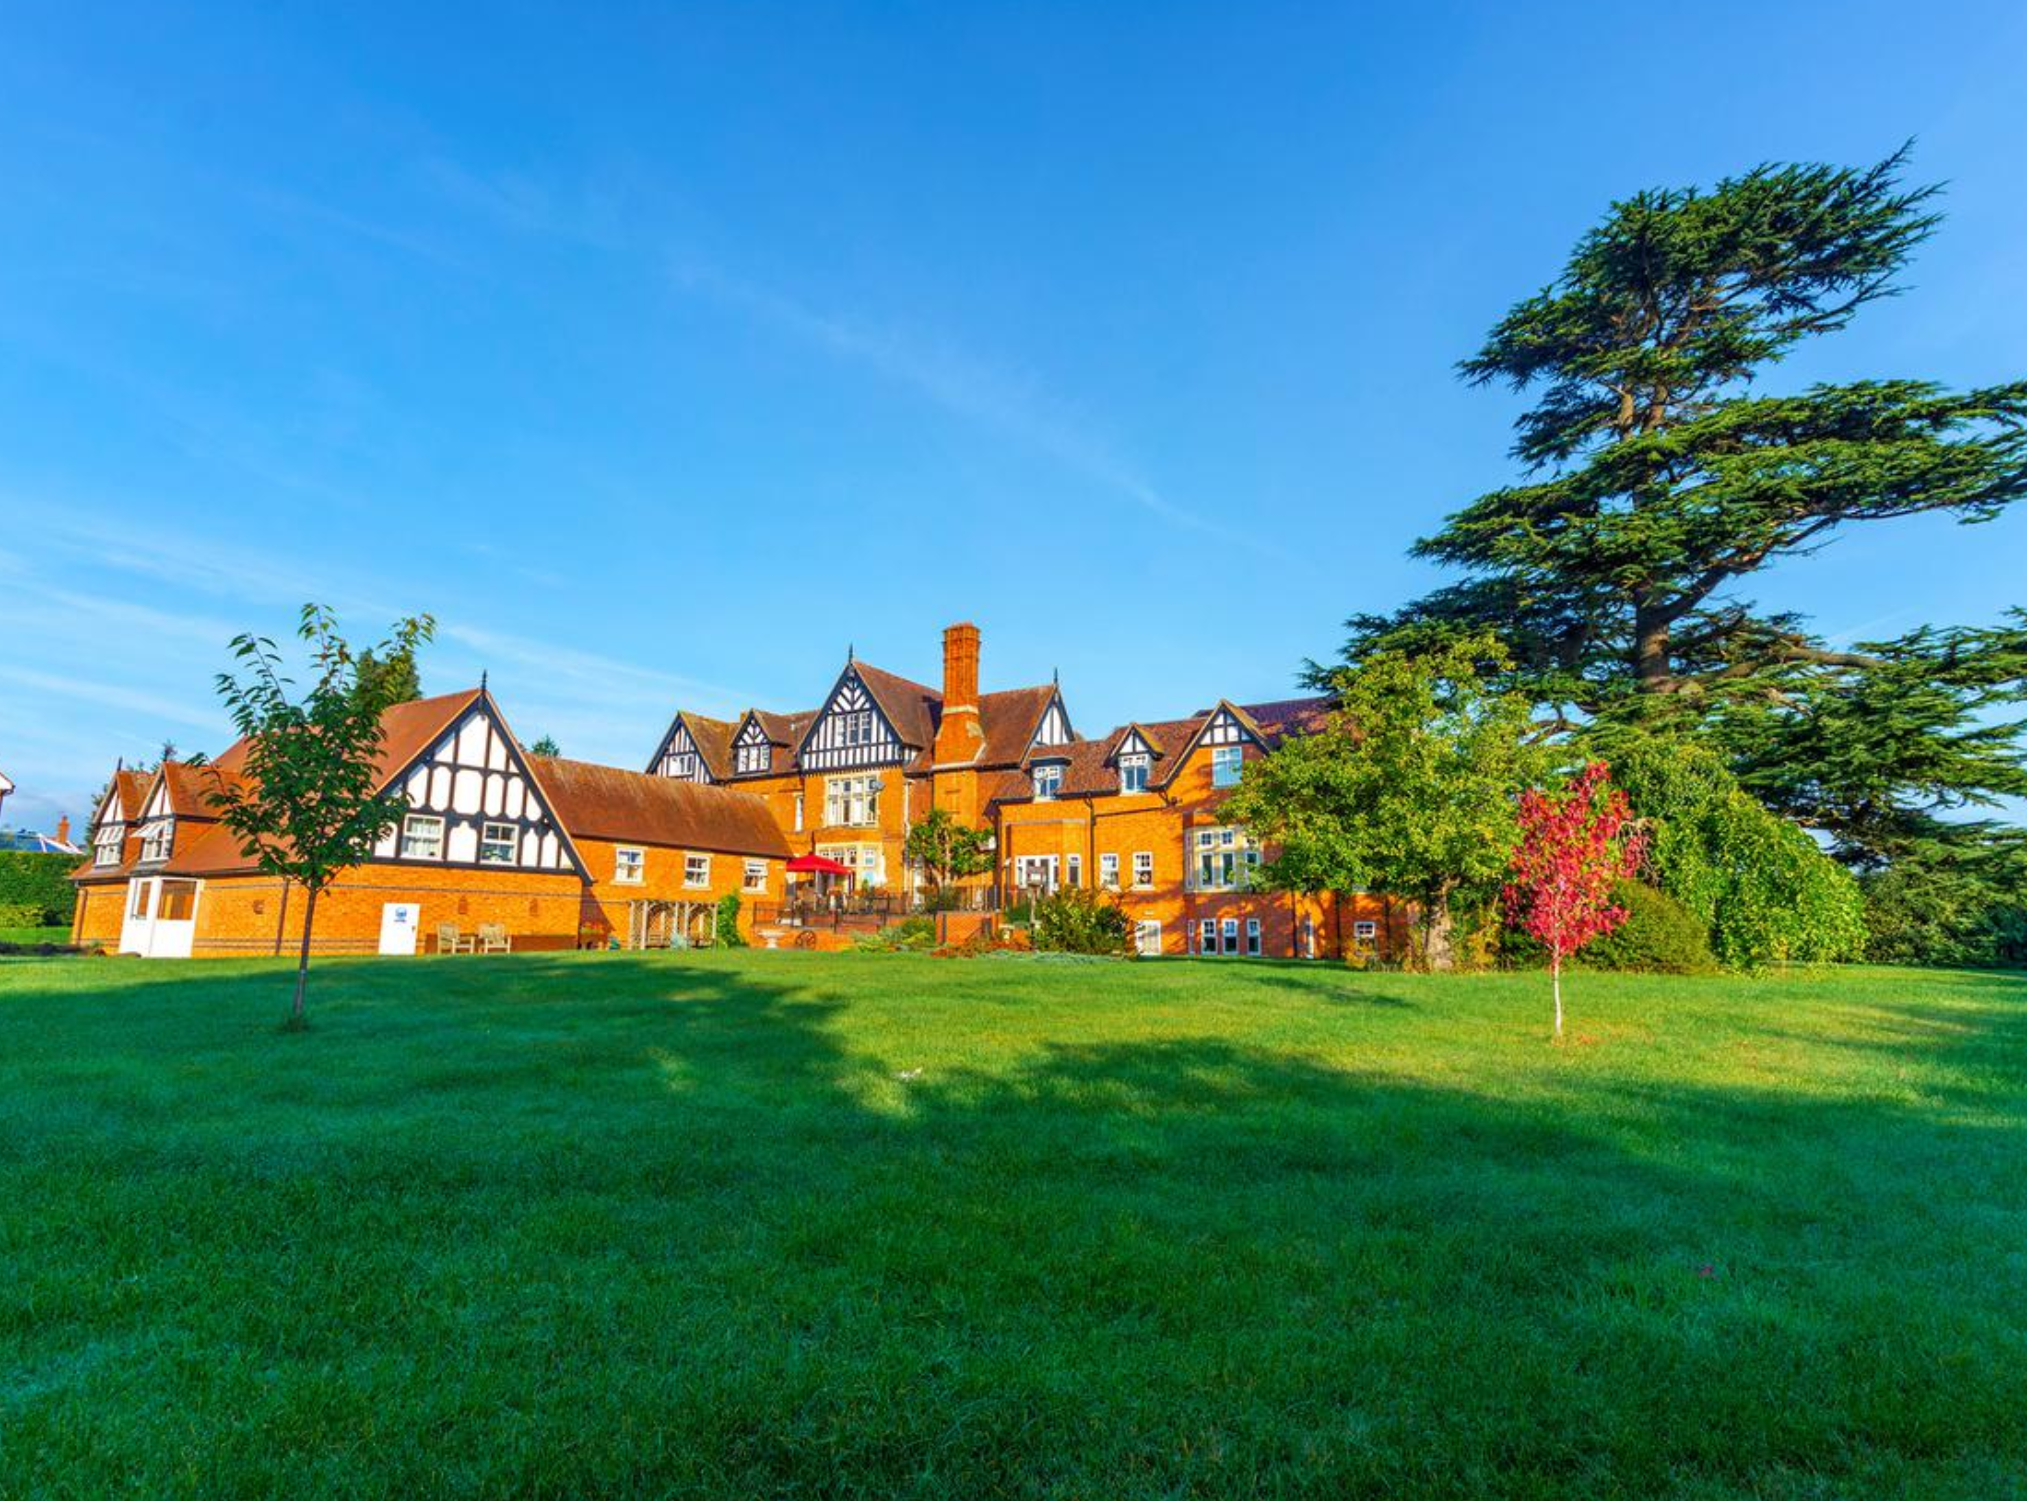 Greenhill Park Residential Care Home in Worcestershire